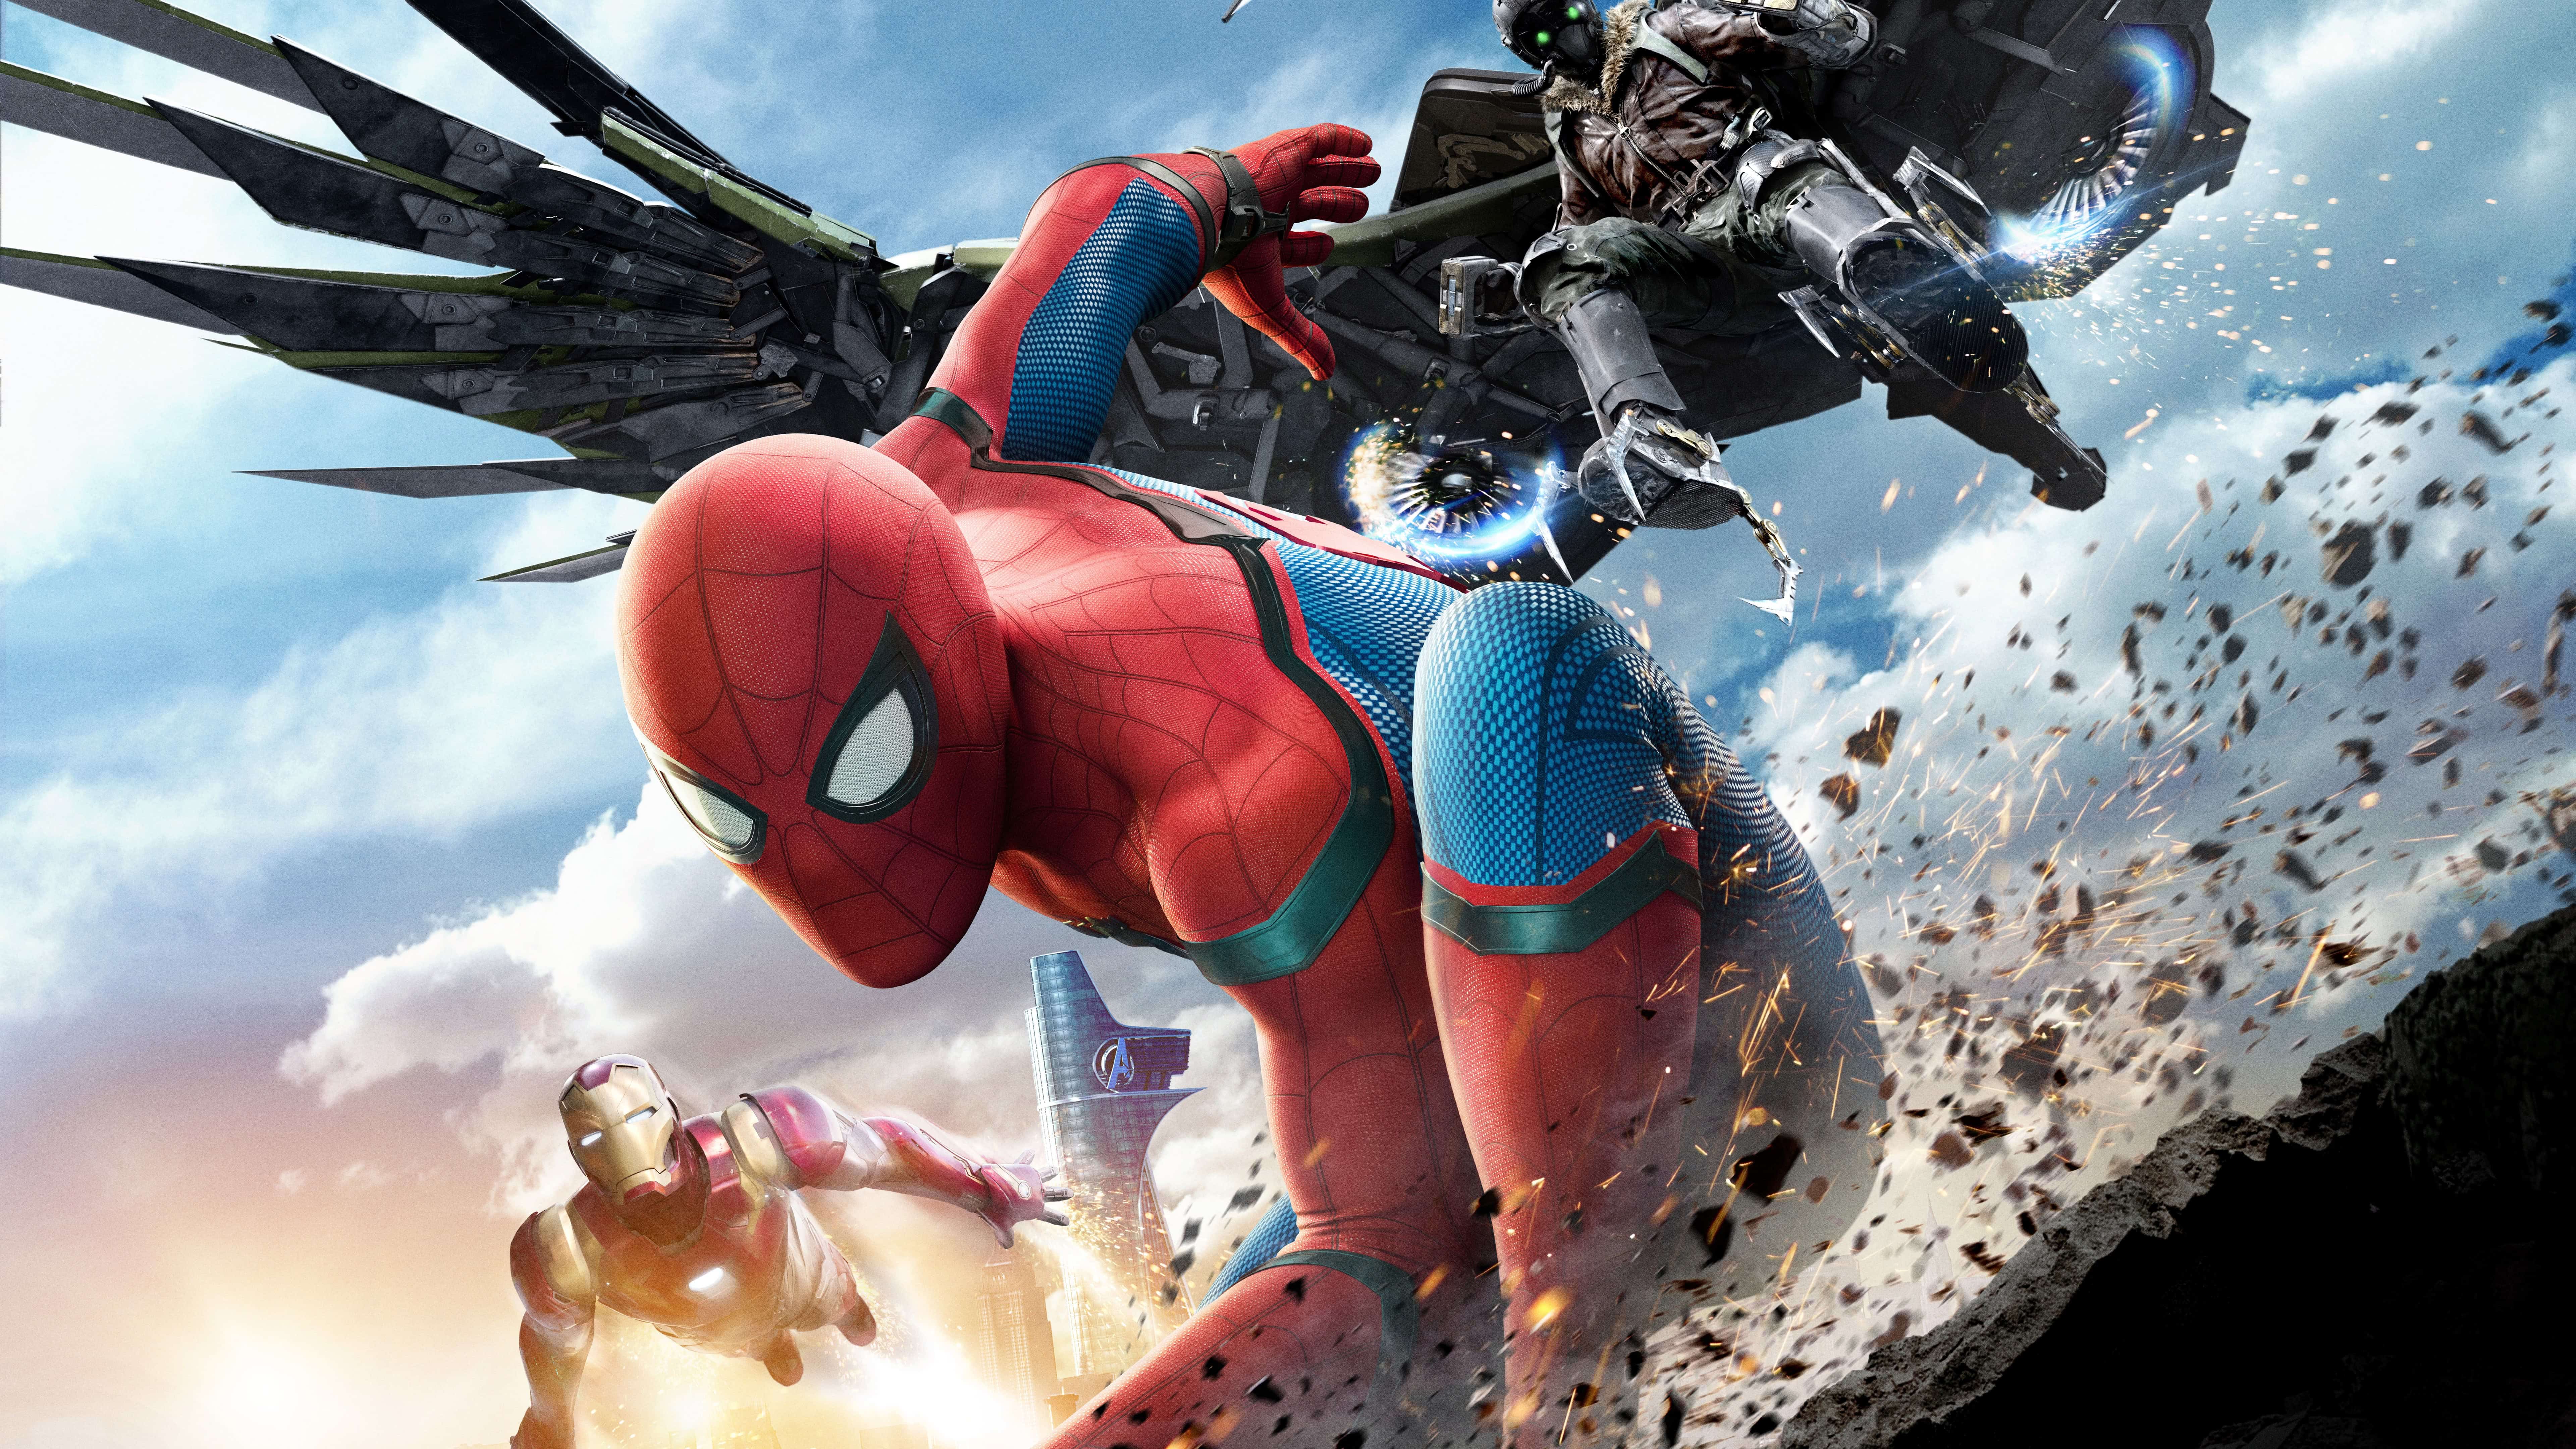 SpiderMan Homecoming movie  Spiderman and Ironman in action 4K wallpaper  download